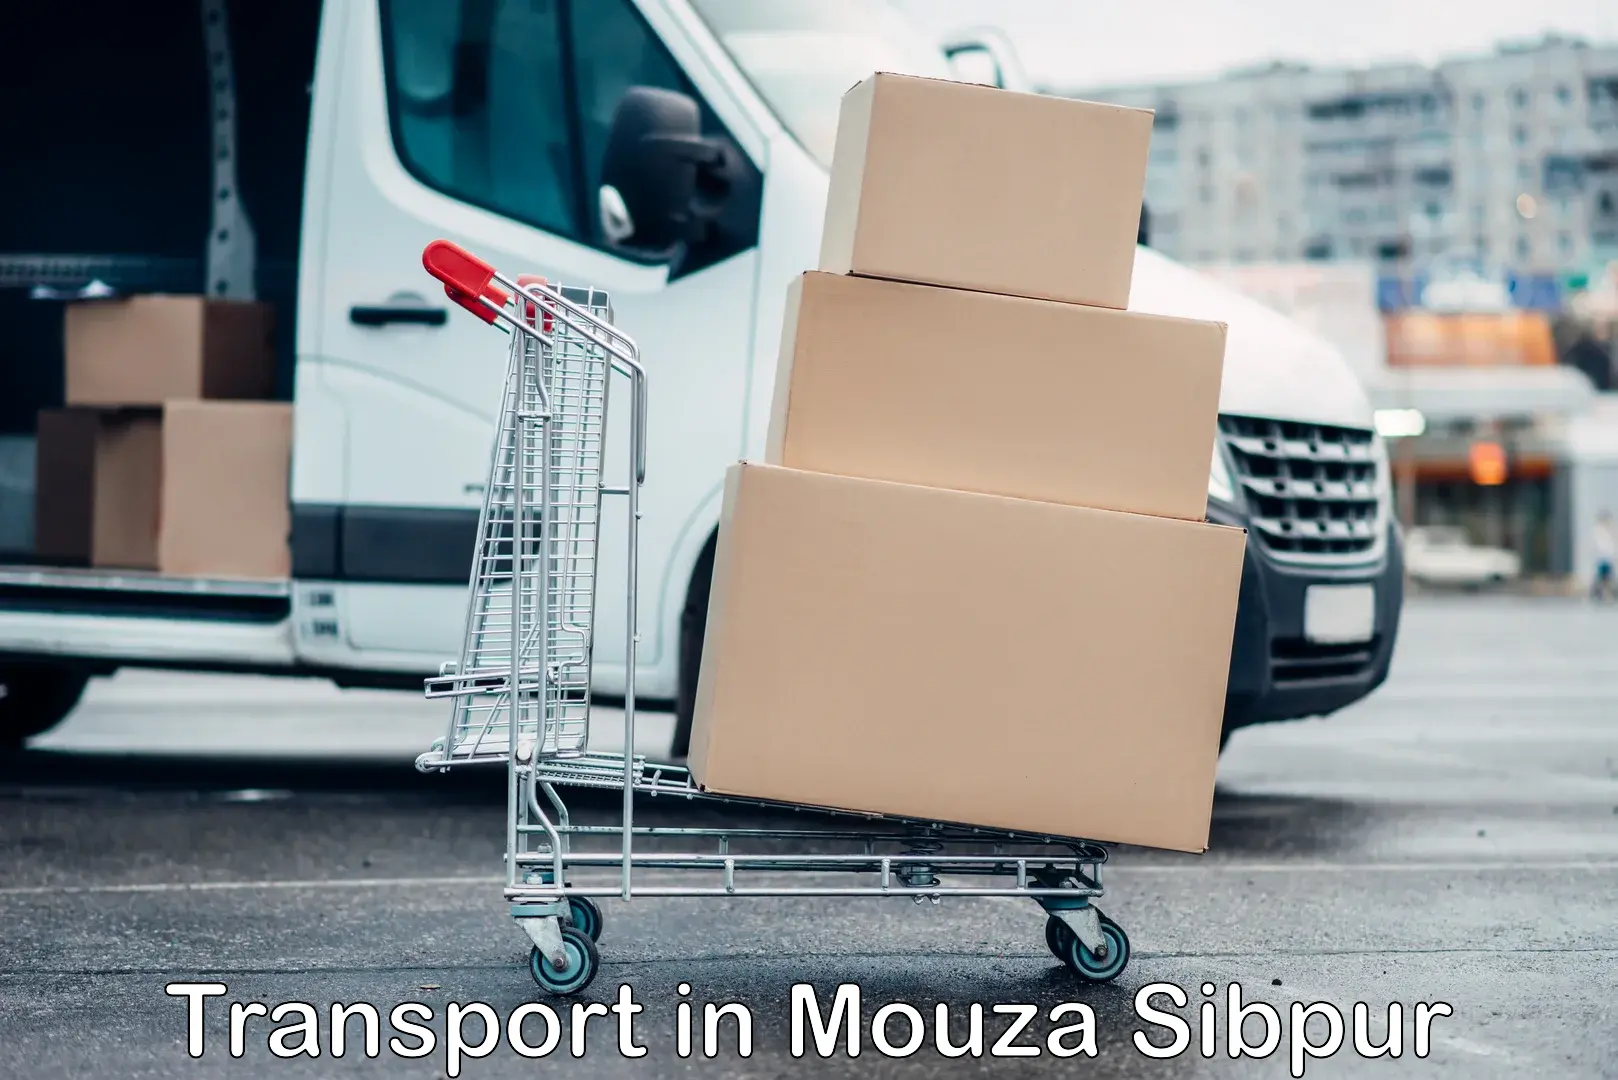 Shipping services in Mouza Sibpur